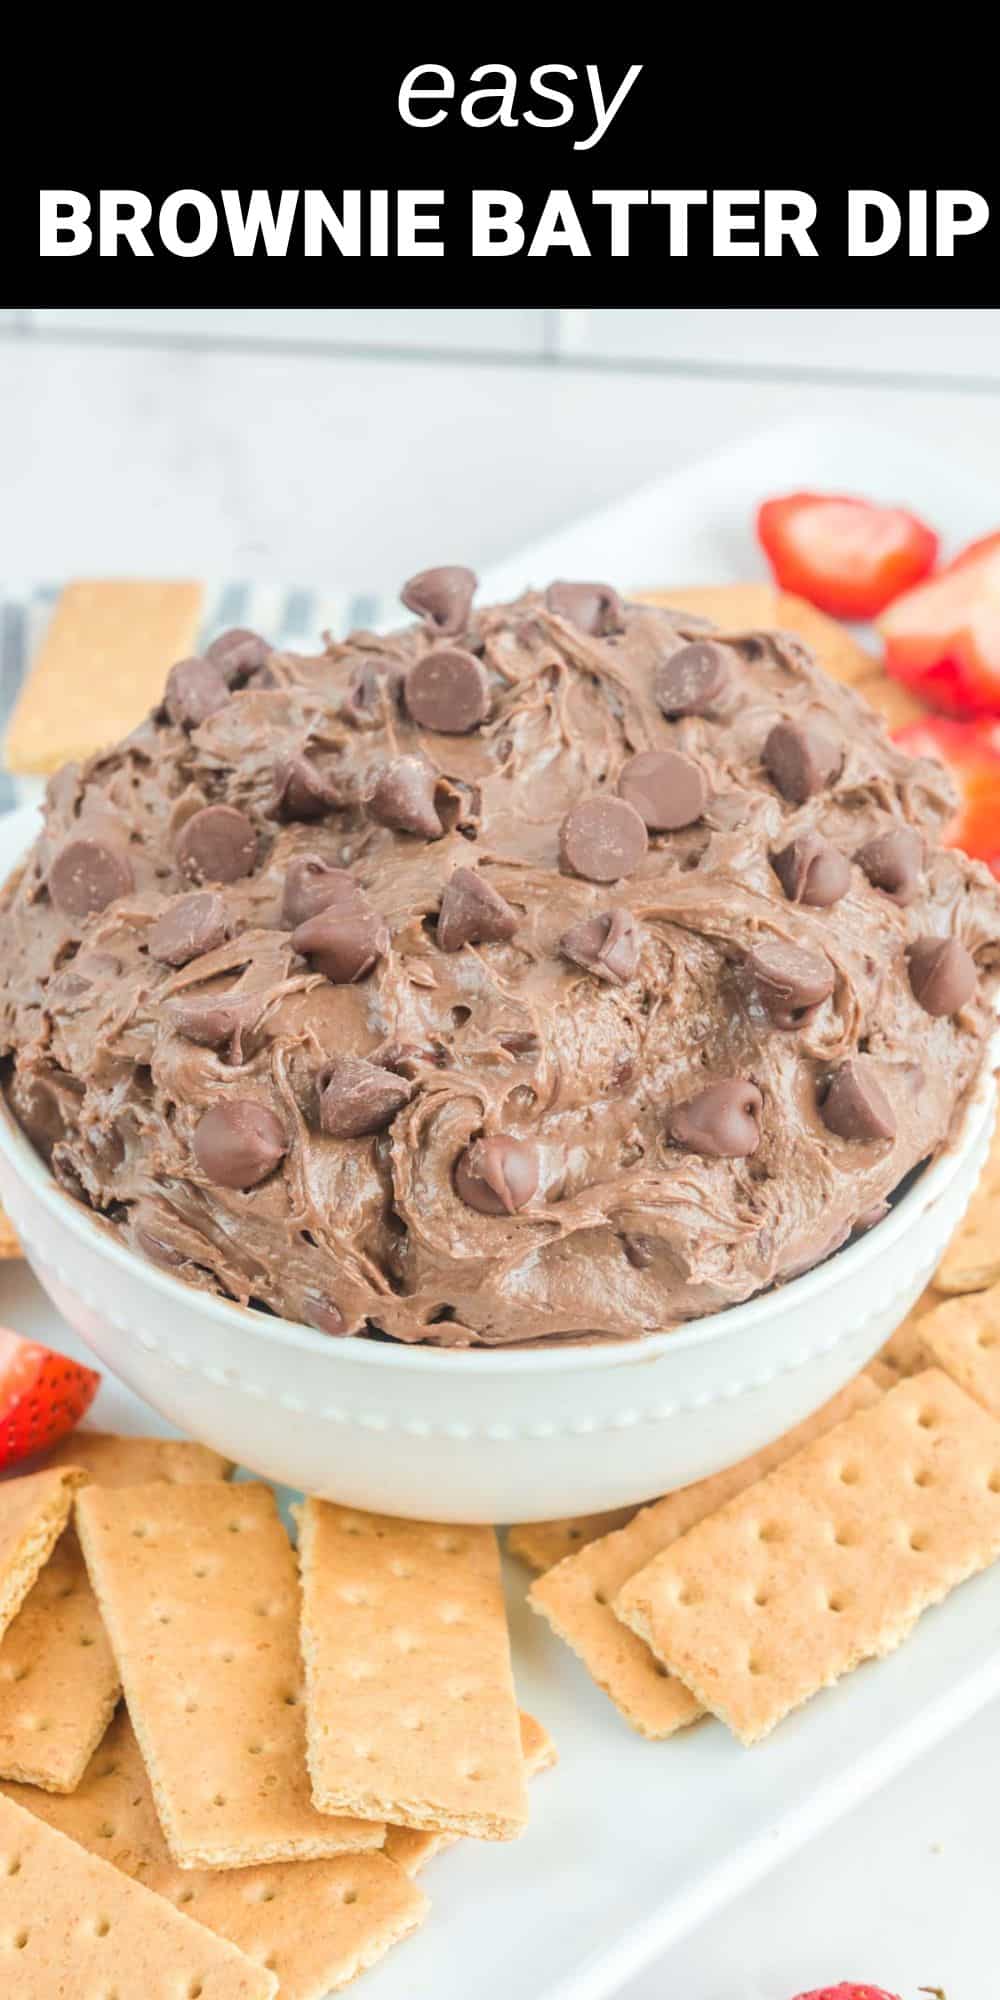 Get ready to satisfy your chocolate cravings with this ultimate Brownie Batter Dip recipe. This easy-no bake dessert dip is rich, creamy, and delightfully sweet making the perfect treat for all the chocoholics out there.